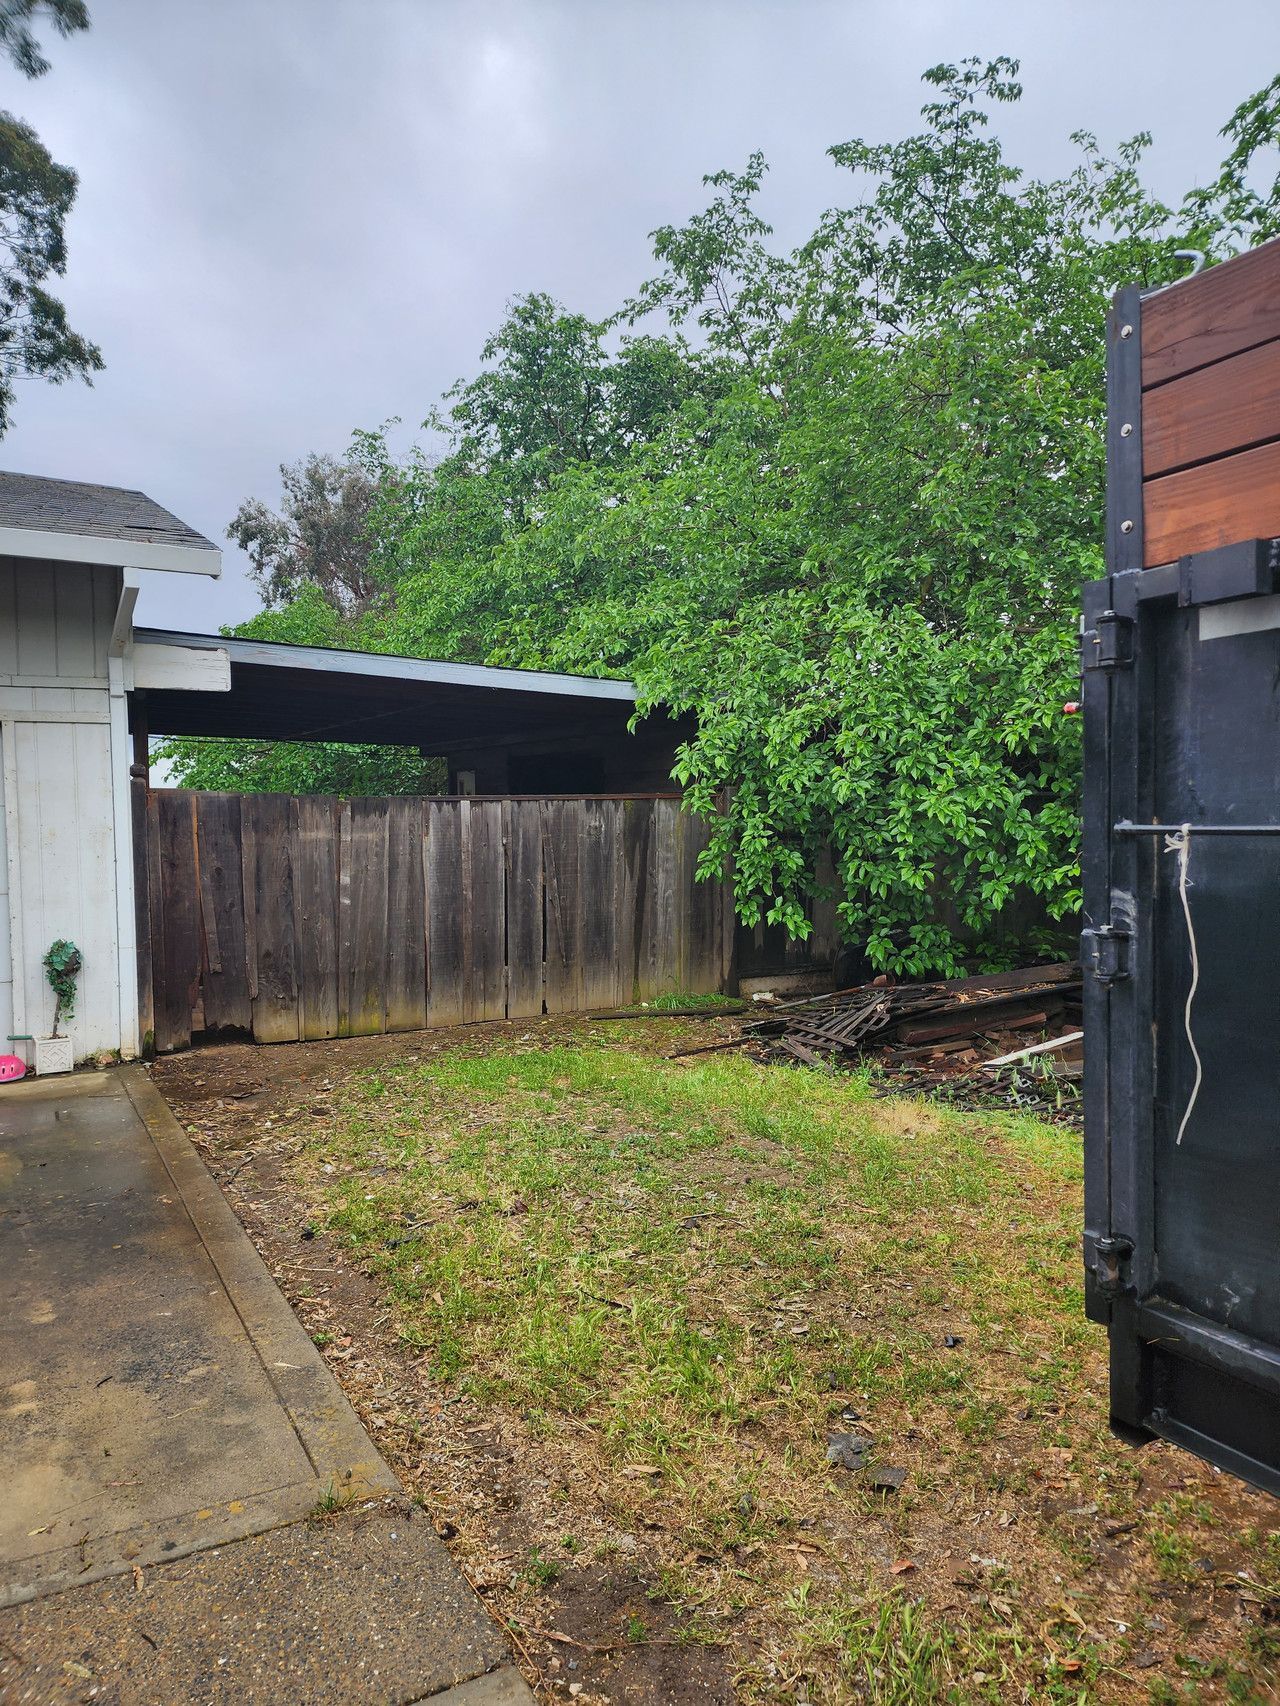 post clean up of side of home all cleared up and no debris left on grass on a rainy cloudy day